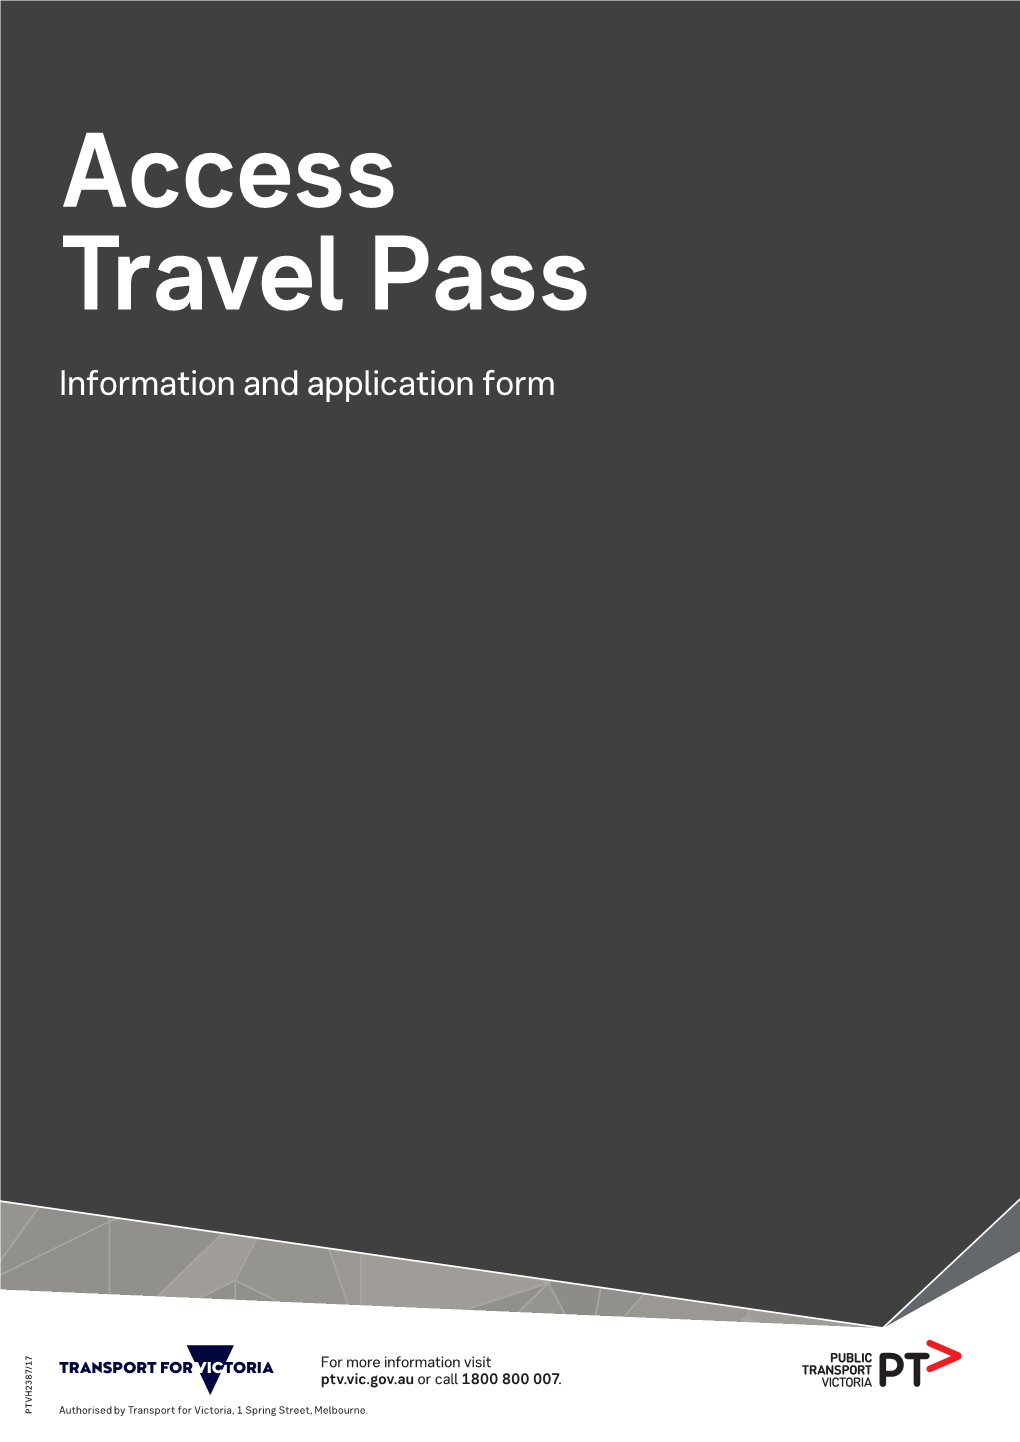 Access Travel Pass Information and Application Form